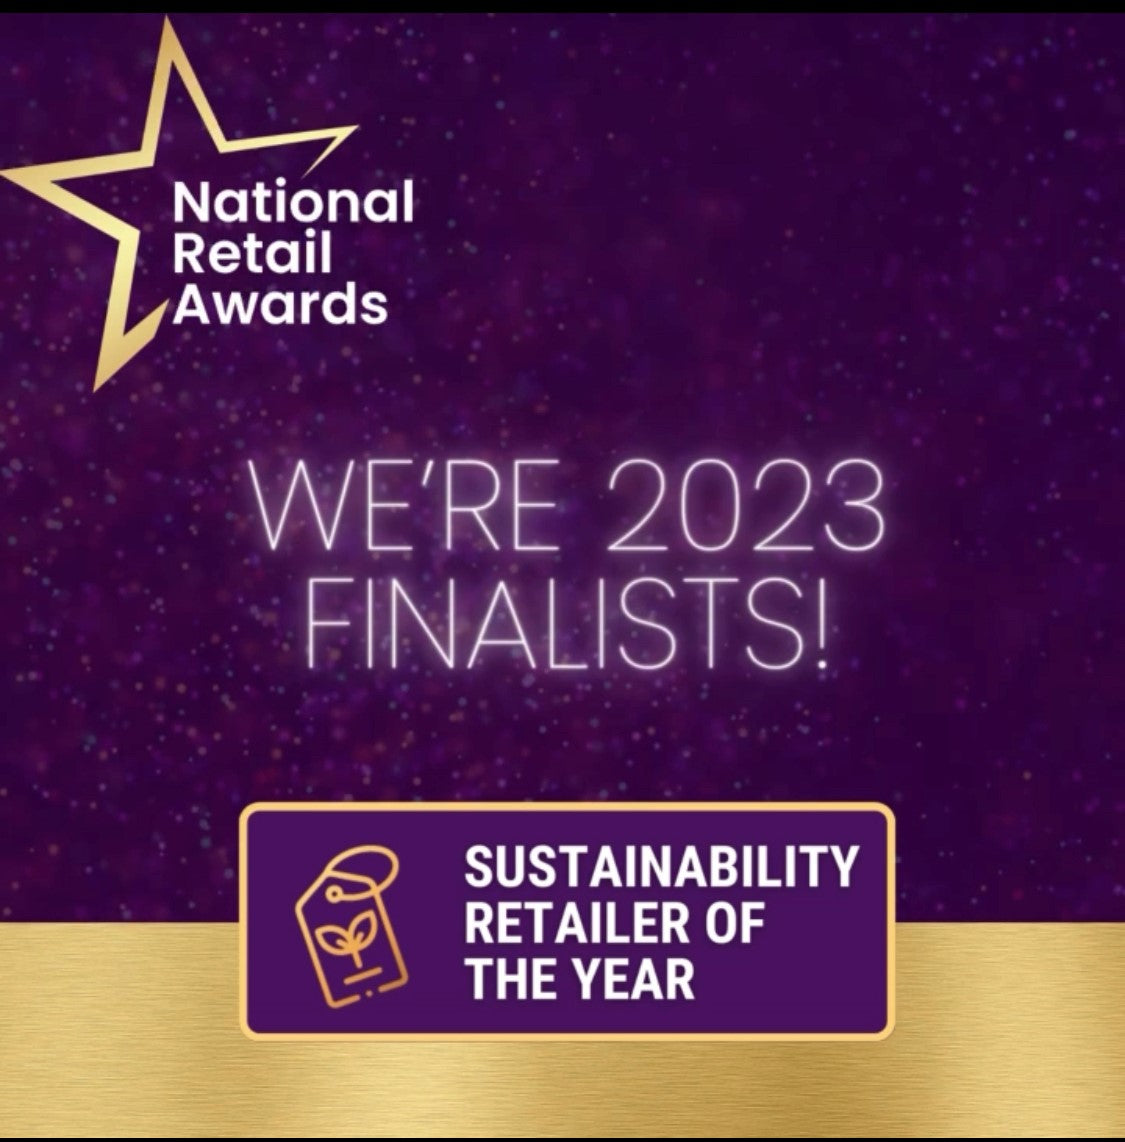 We are finalist in The National Retail Awards in 4 categories!!! Sustainability Retailer of the Year 2023